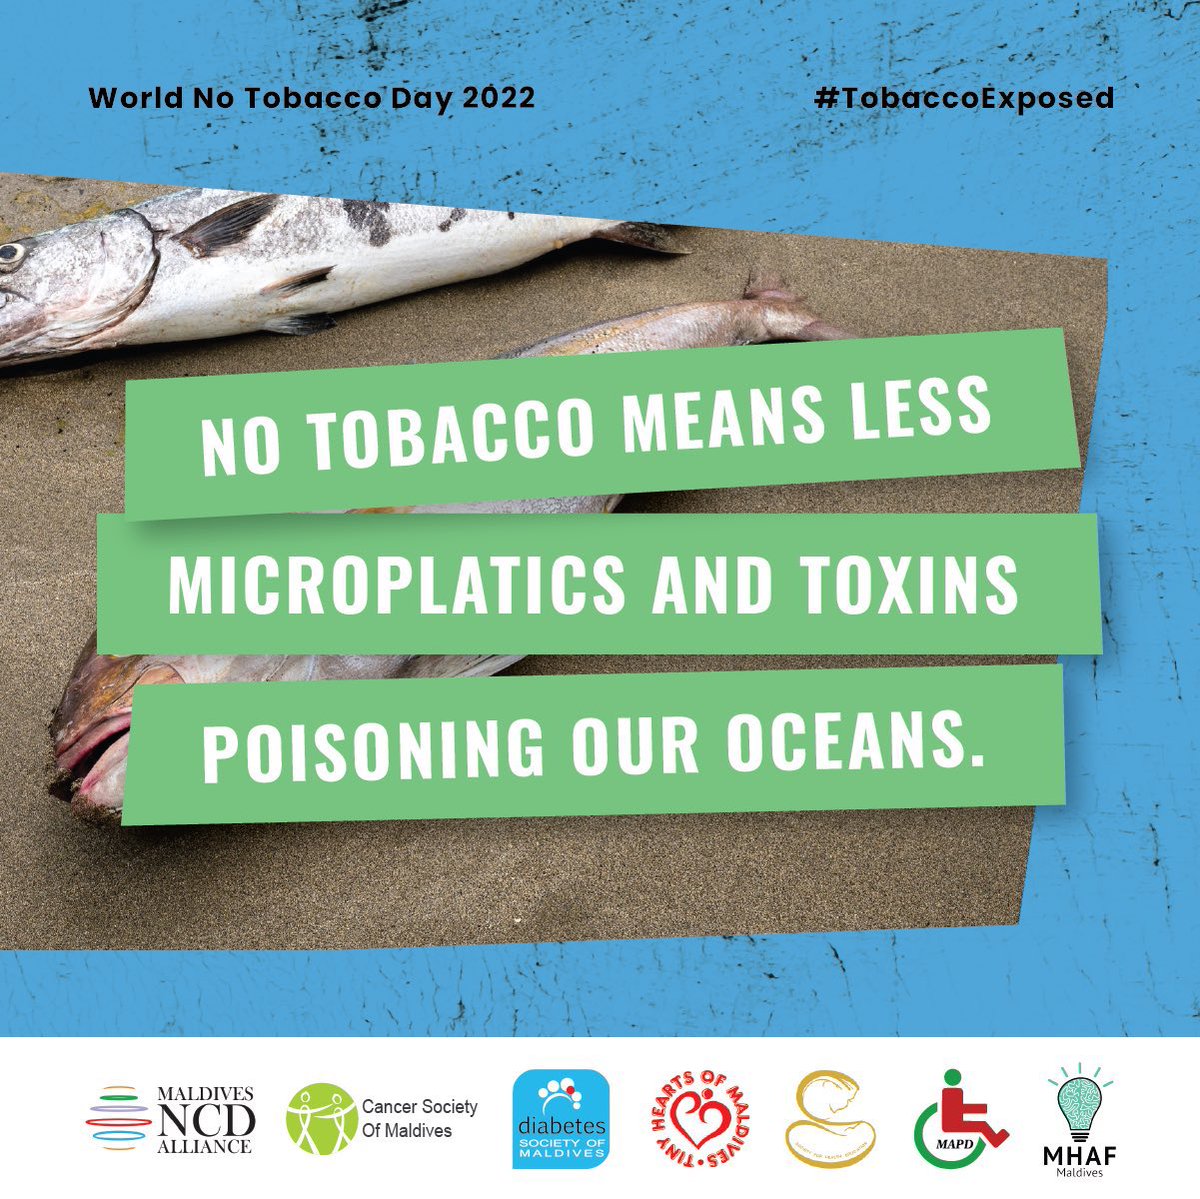 Tobacco poisons our oceans:
👎 beaches are littered with millions of cigarette butts.
#NoTobacco means less microplastic & toxins in our oceans.
 
#TobaccoExposed🚭 #WNTD2022